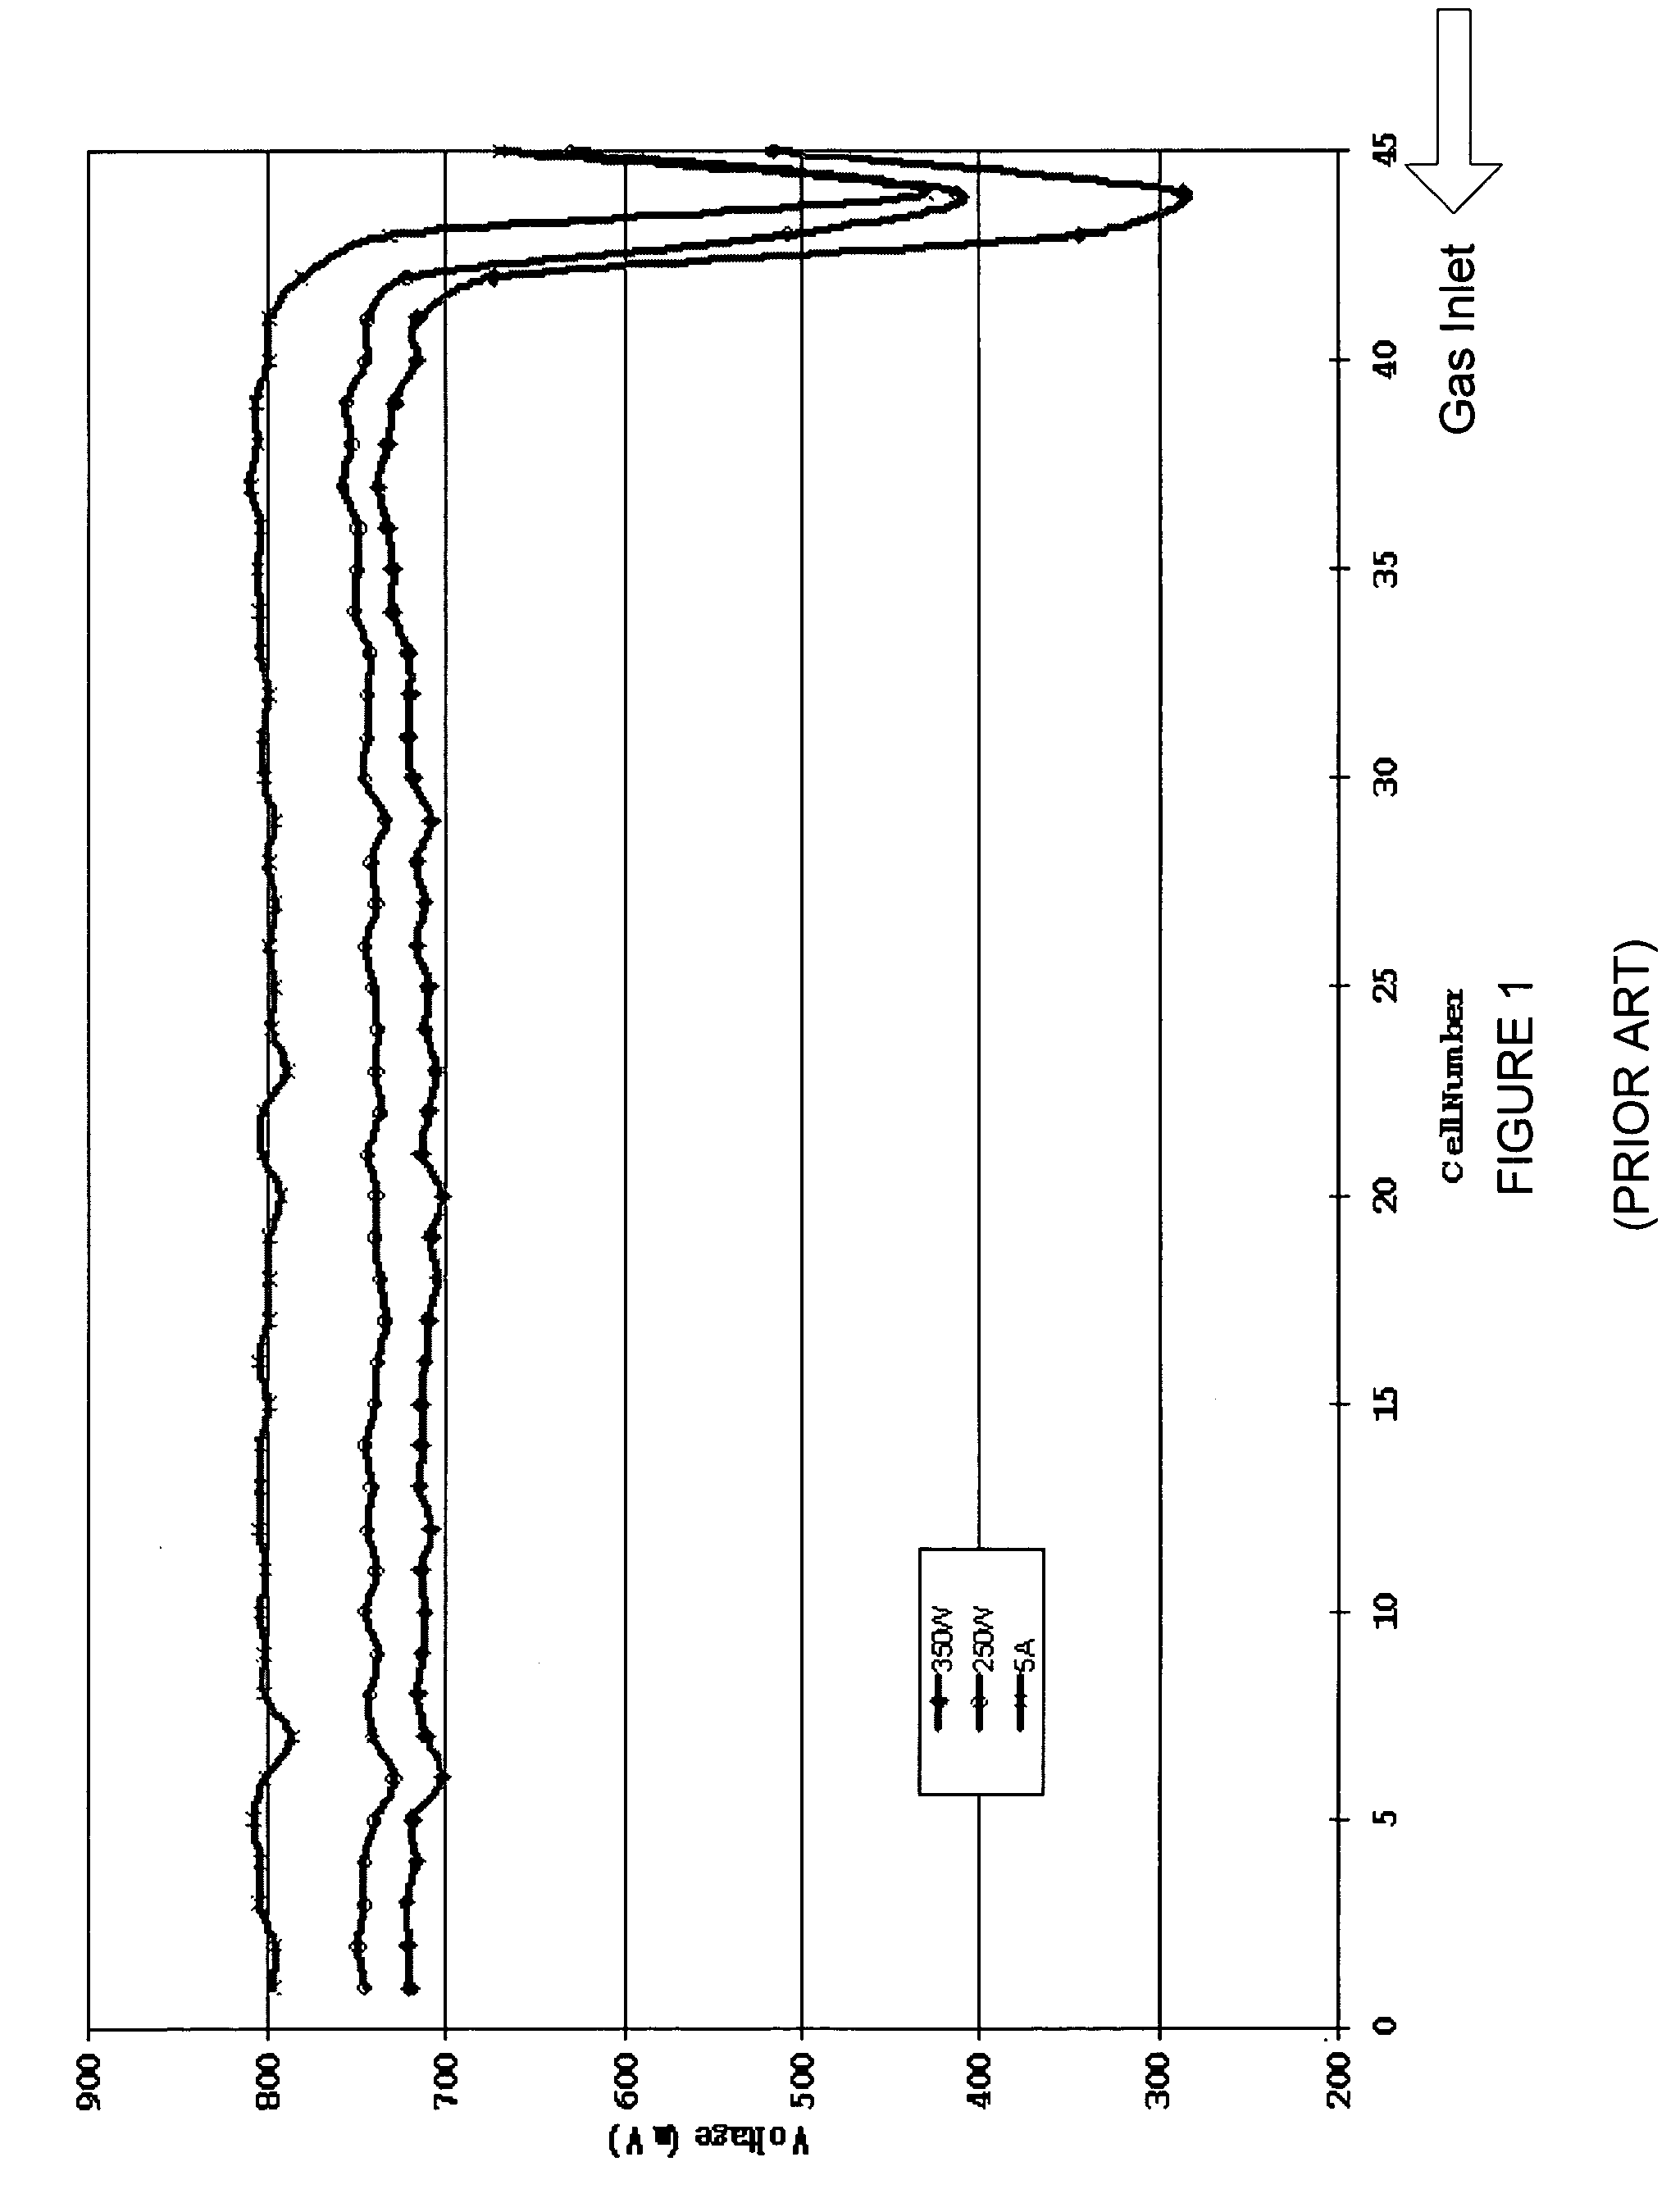 Fuel cell stack with even distributing gas manifolds